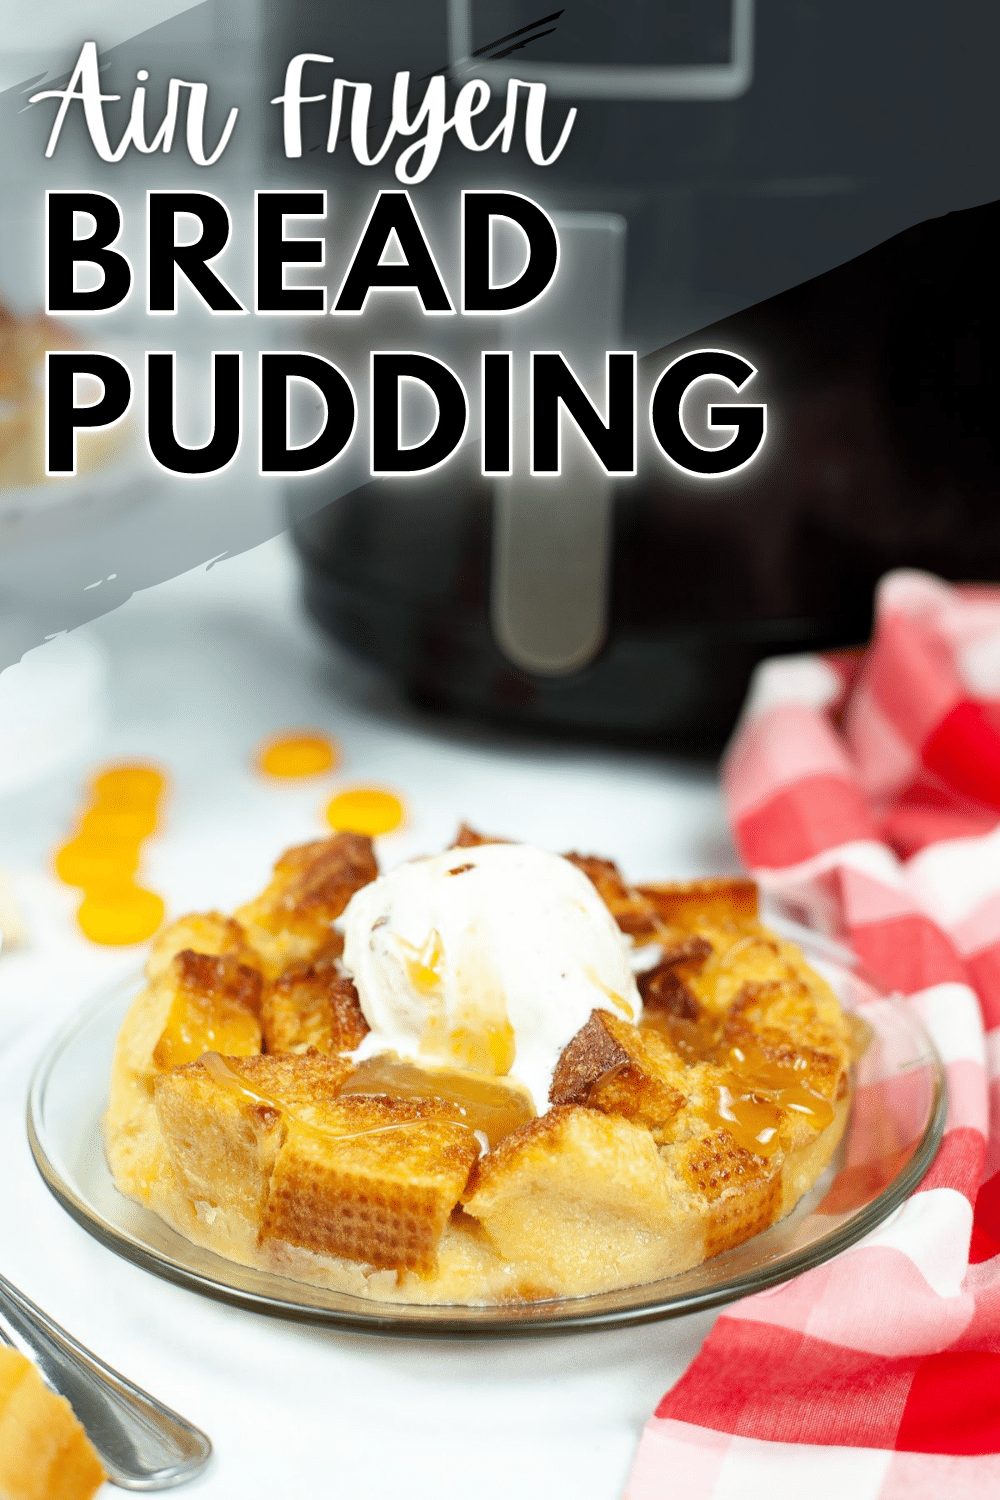 A vertical image of Air Fryer Bread Pudding on a glass serving plate with an air fryer in the background and text at the upper left corner which says "Air Fryer Bread Pudding"